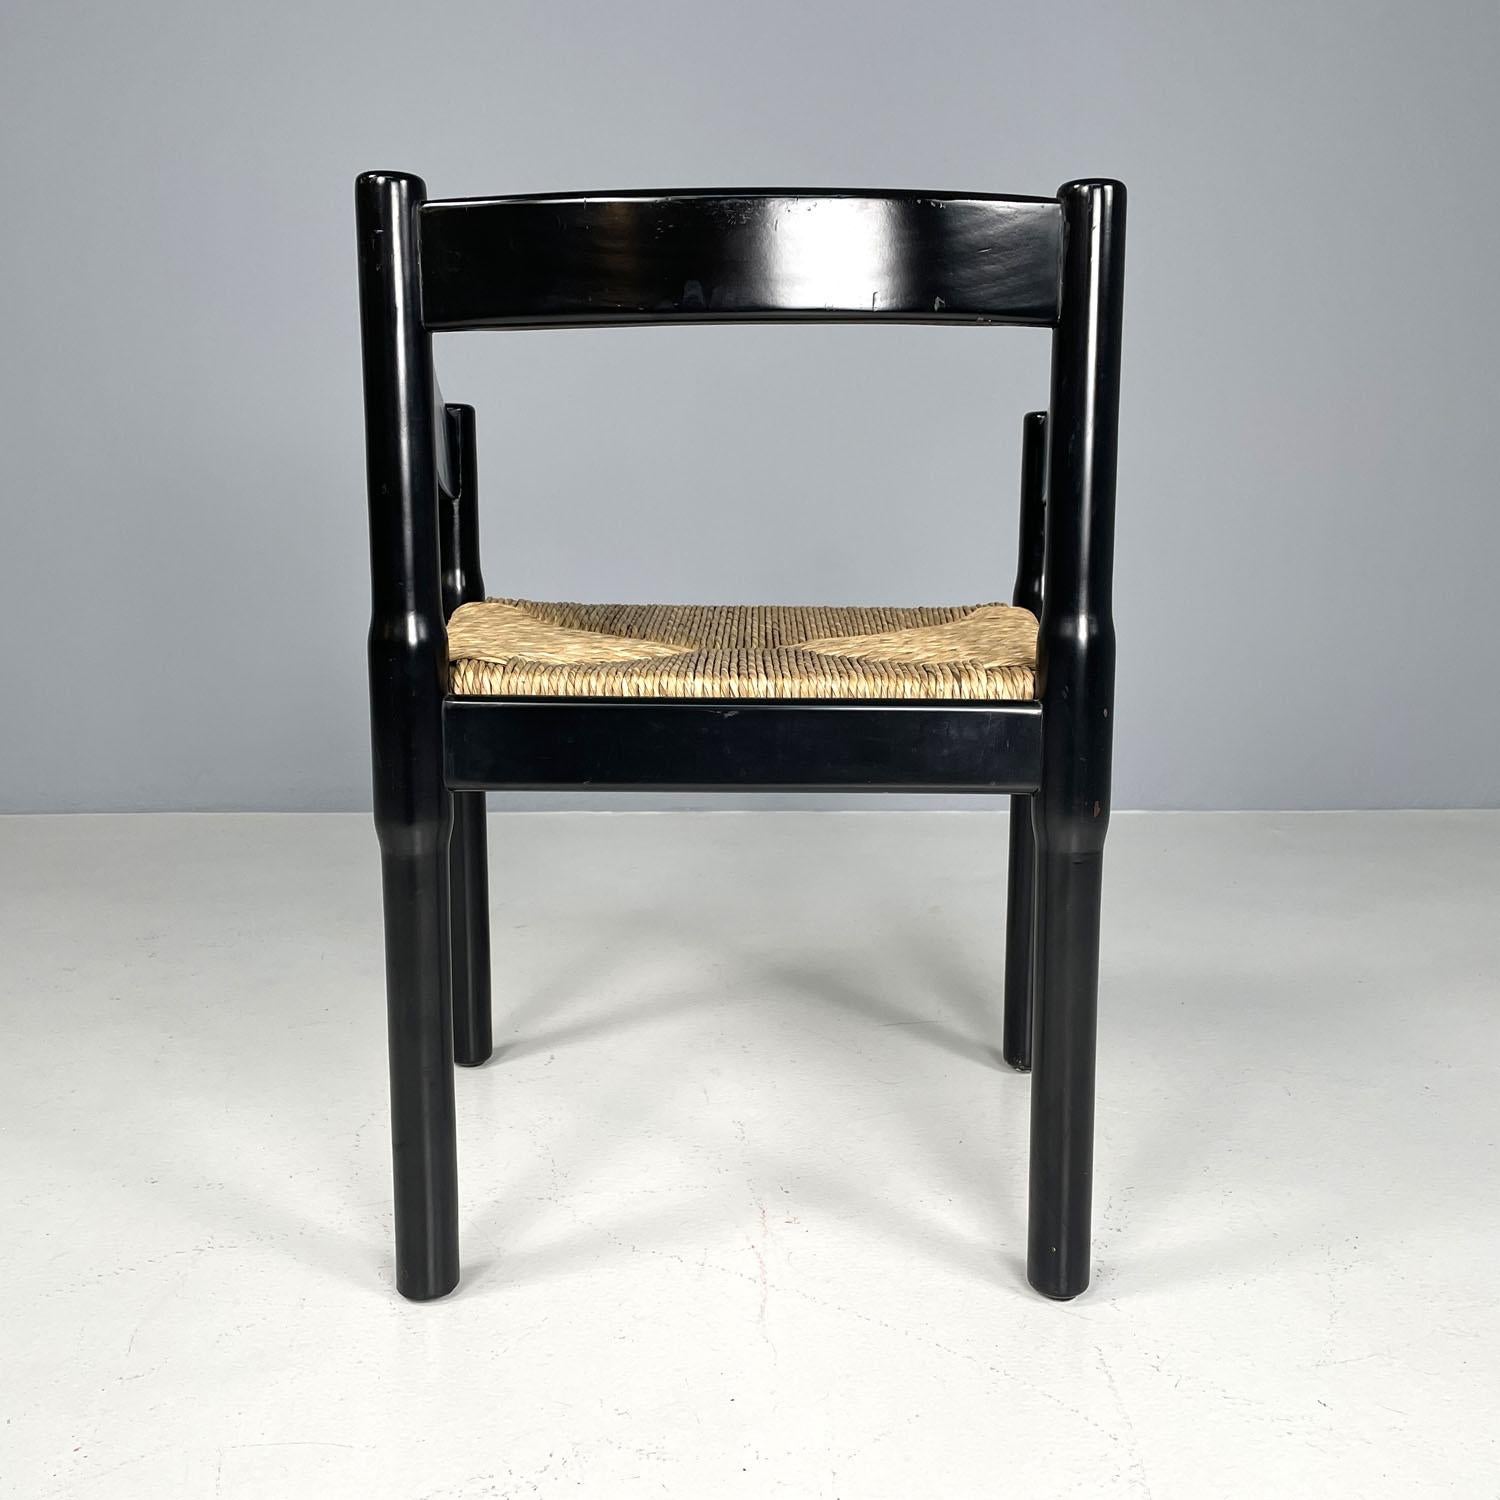 Straw Italian modern black wood chairs Carimate by Vico Magistretti for Cassina, 1970s